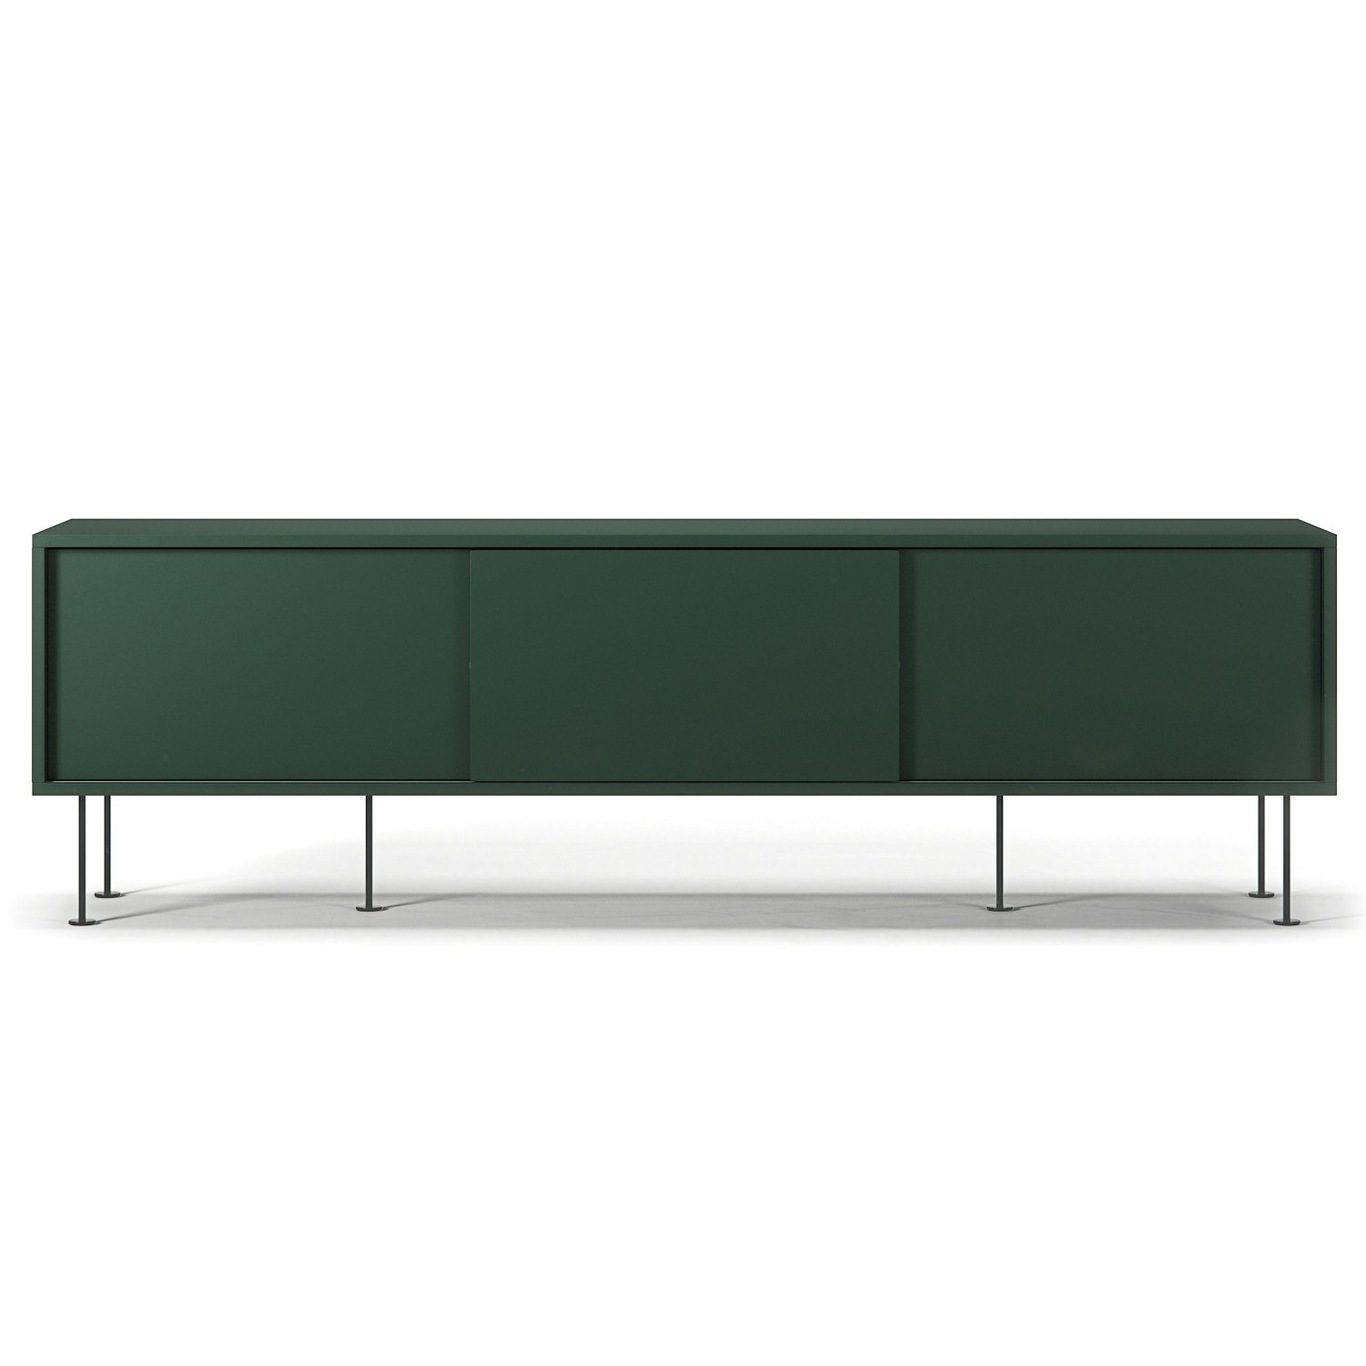 Vogue Media Bench With Legs 180 cm, Green / Black